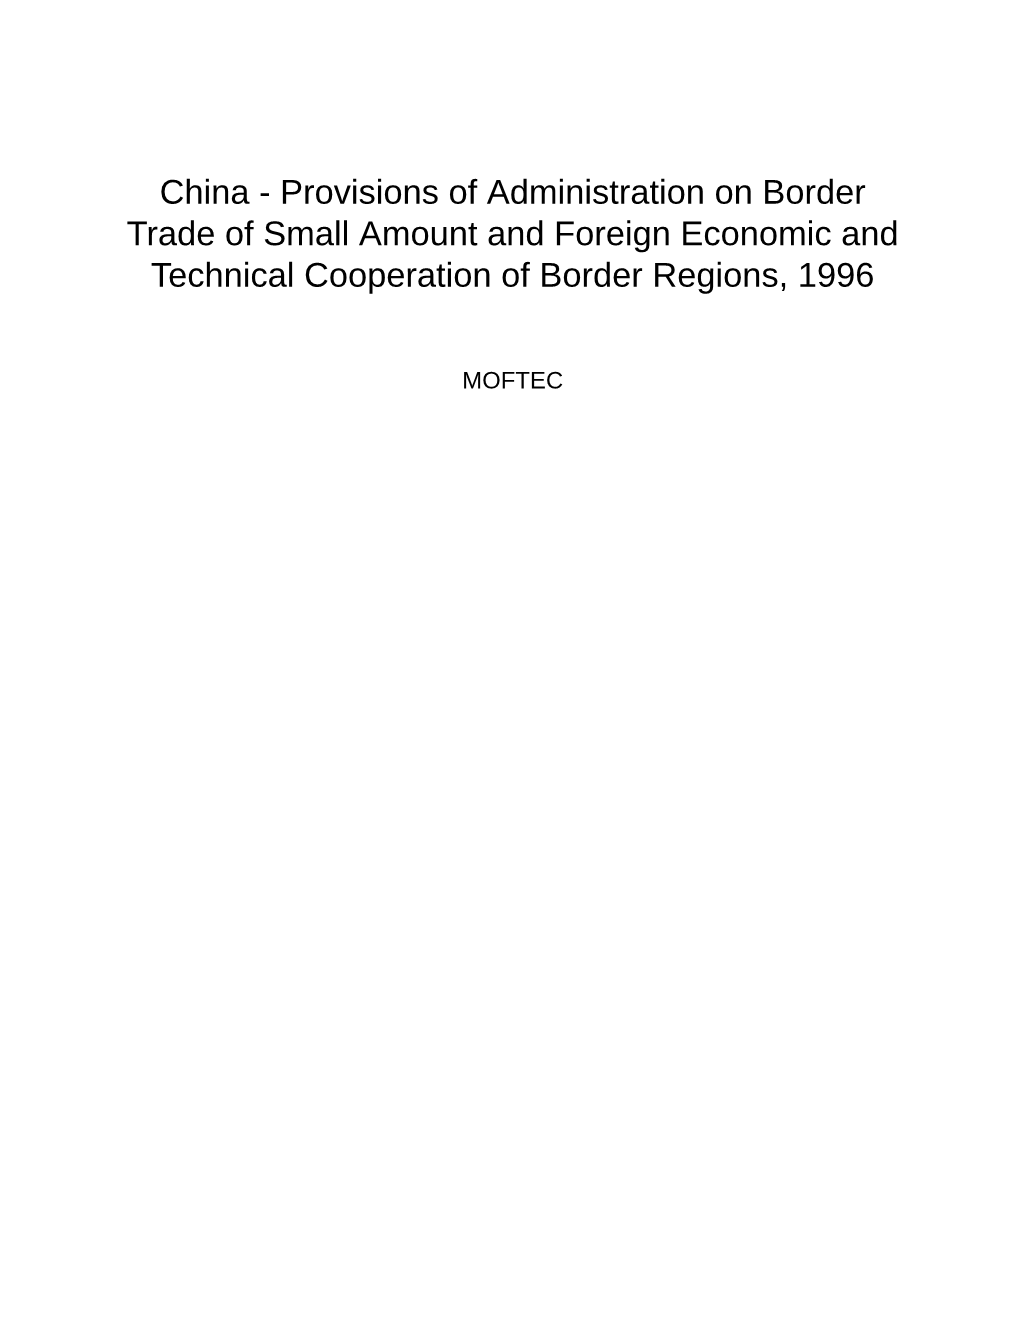 China - Provisions of Administration on Border Trade of Small Amount and Foreign Economic and Technical Cooperation of Border Regions, 1996